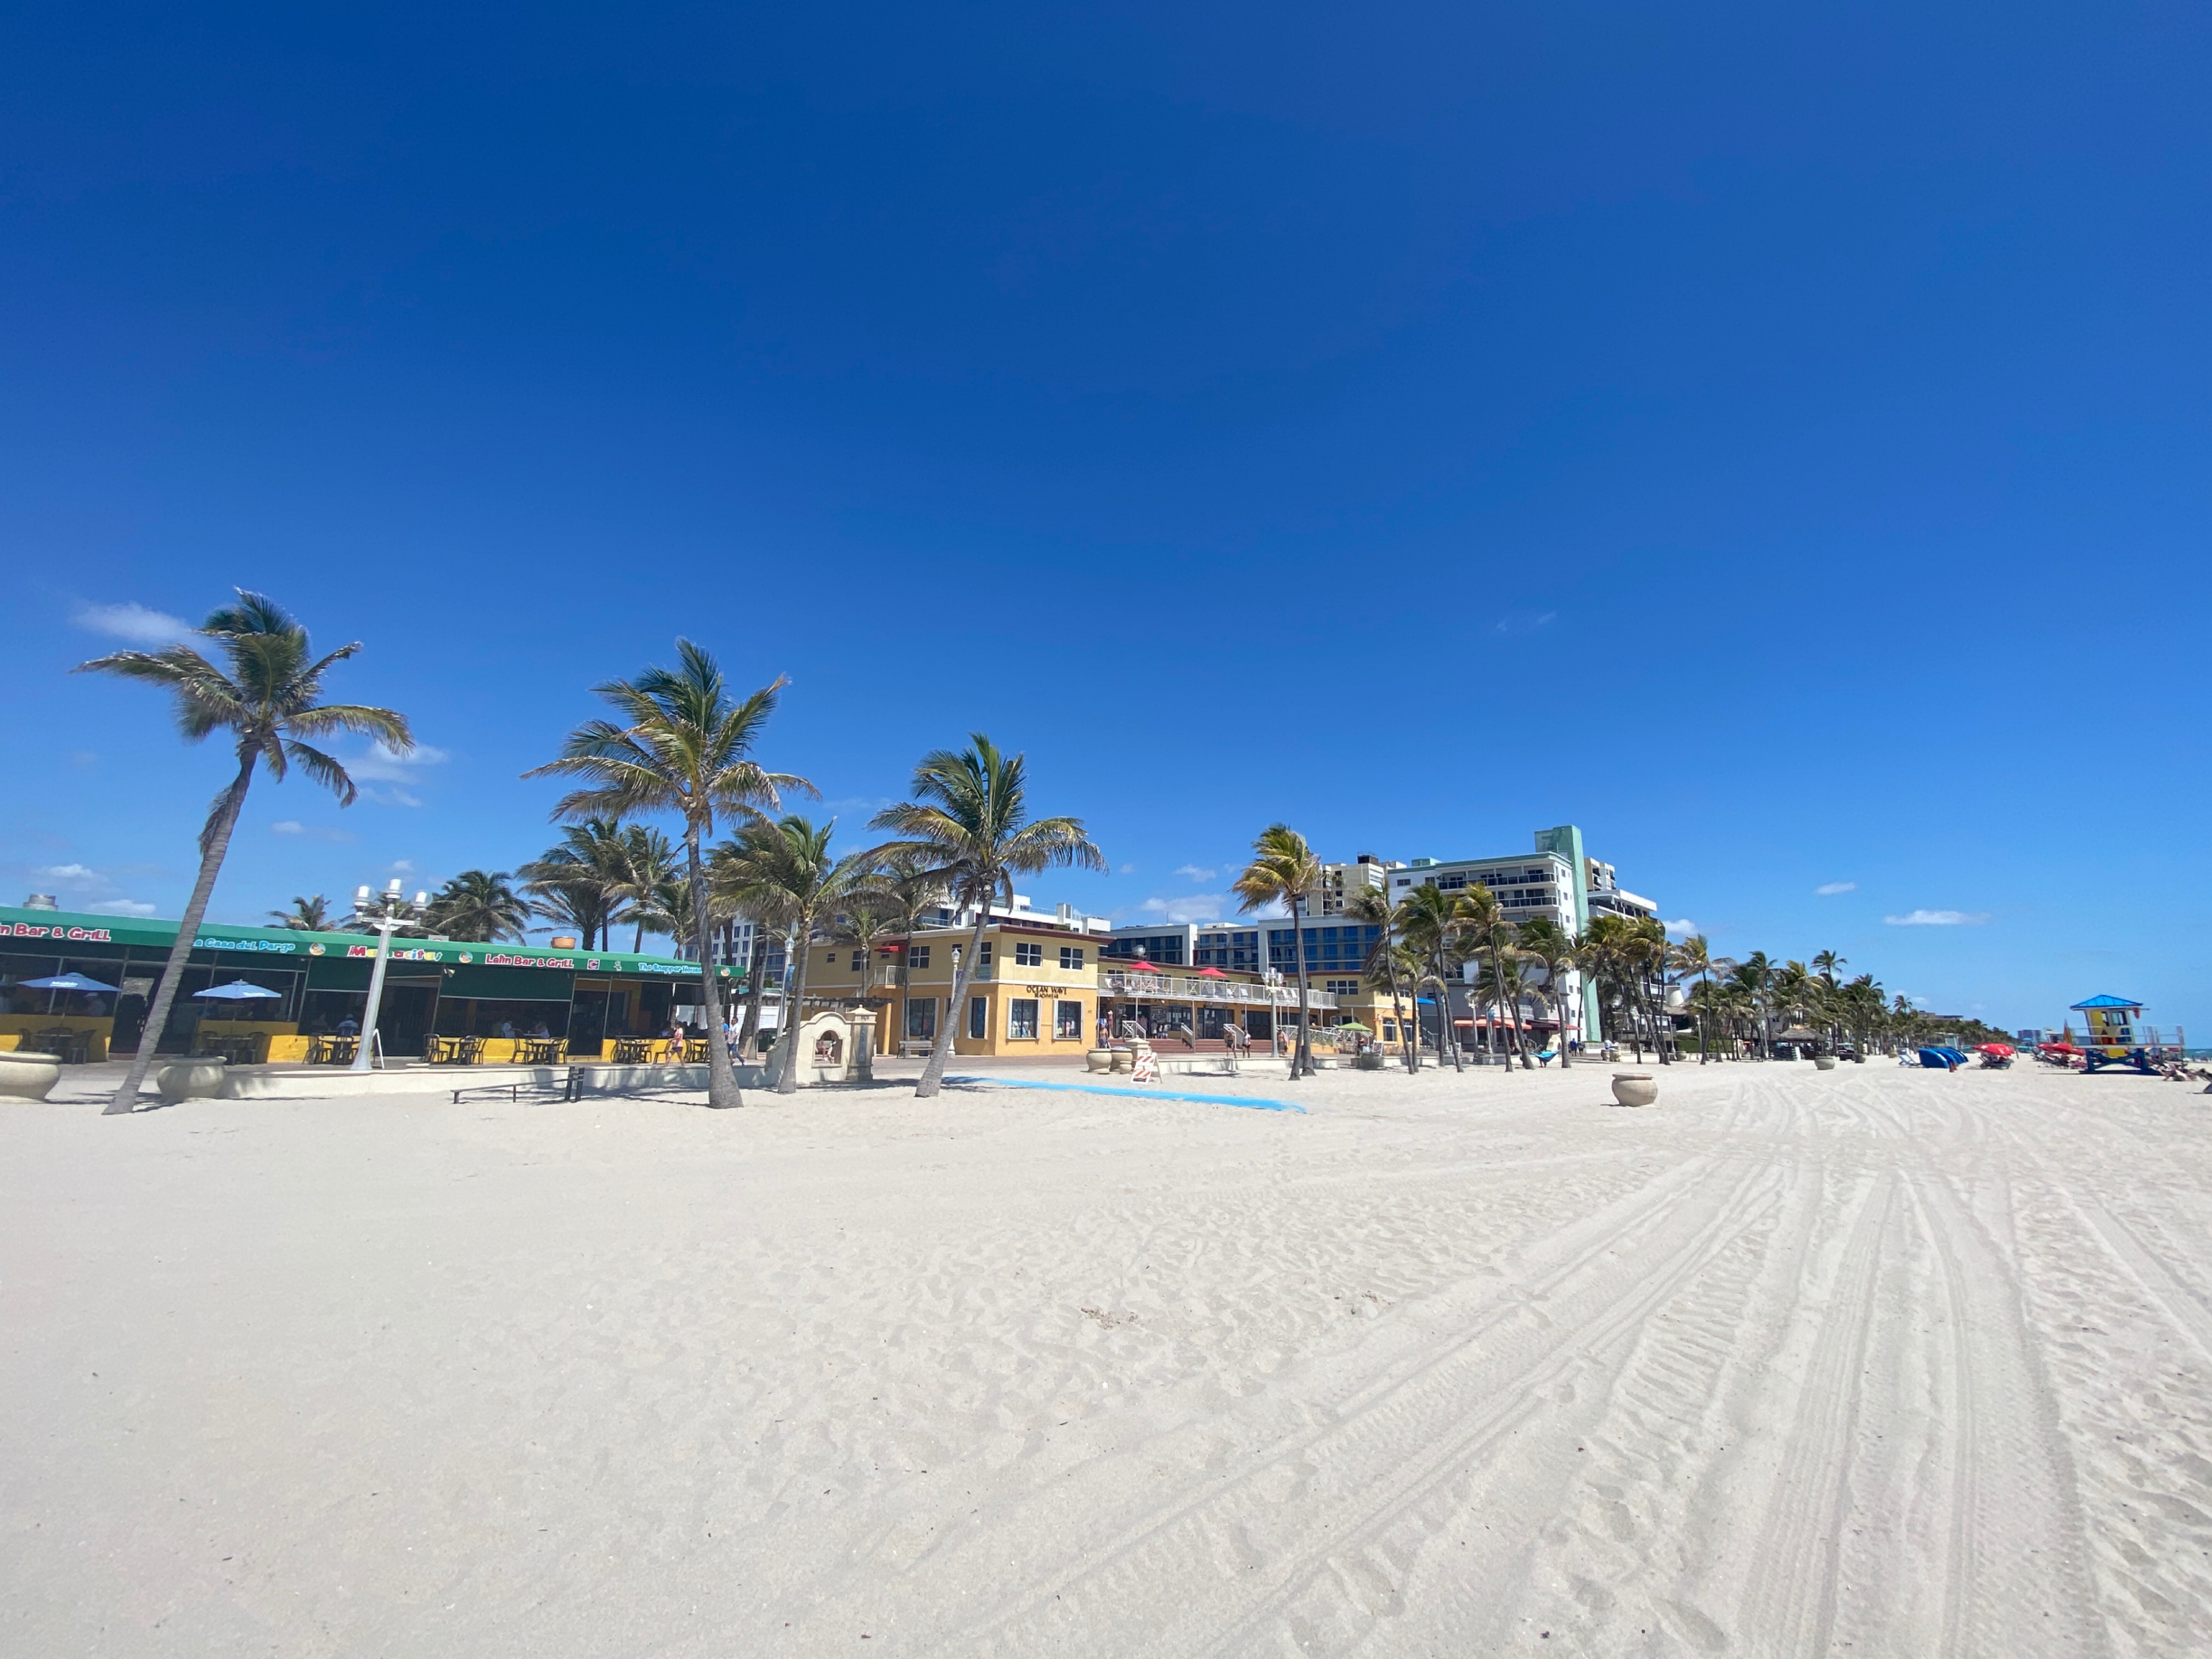 Travel with Me: My Beach Trip to Hollywood, Florida